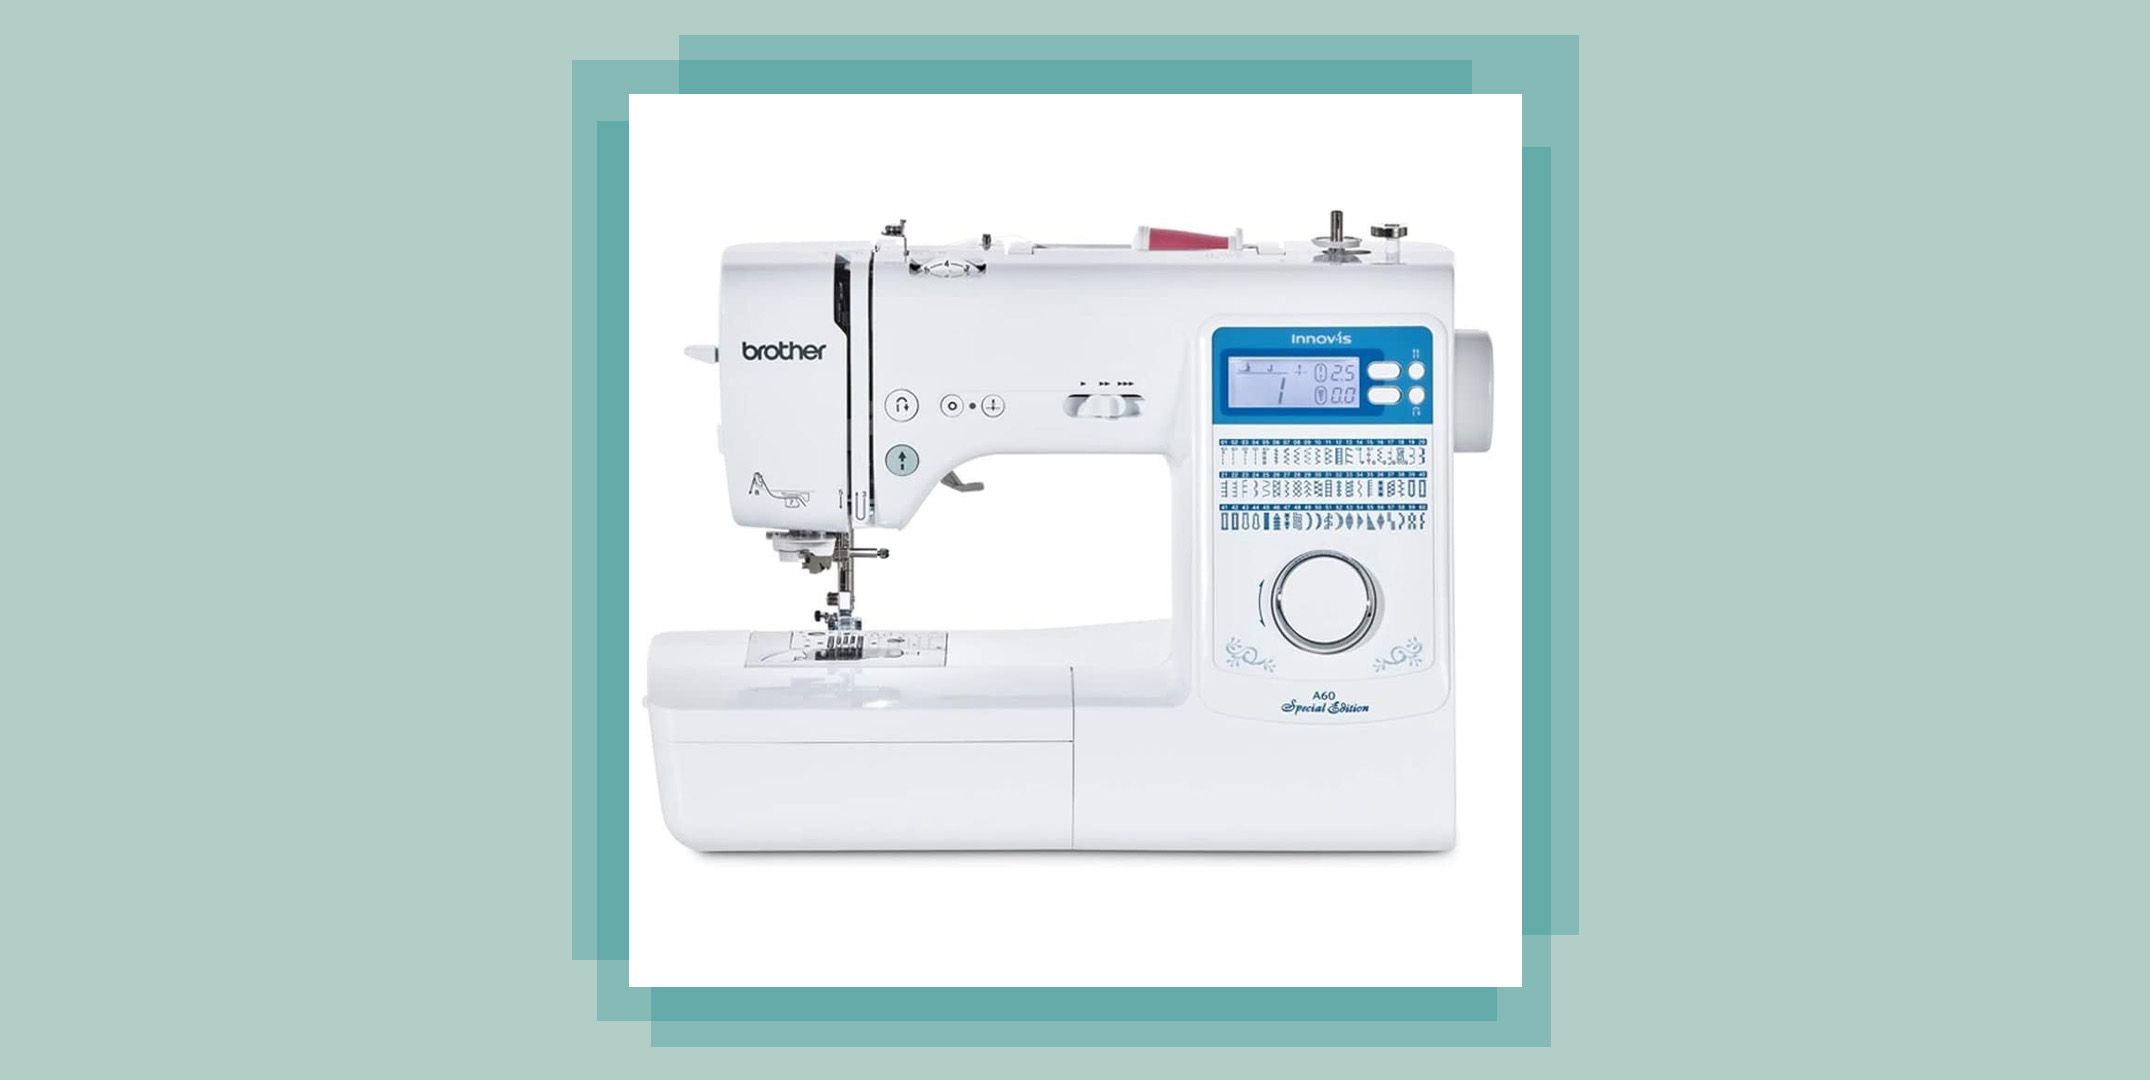 Long-Lasting singer sewing machines bobbins From Leading Brands